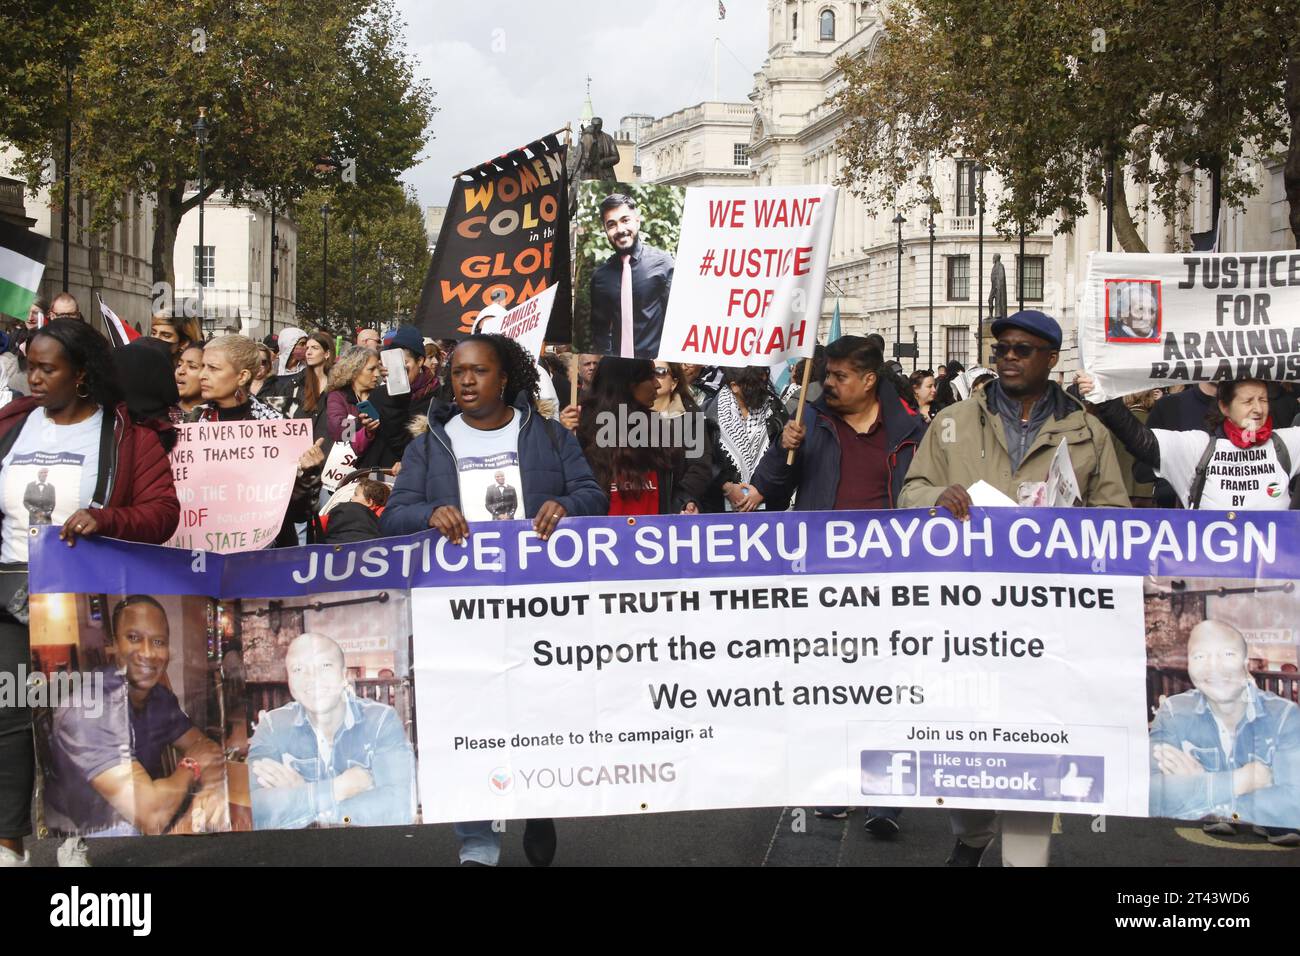 London, UK 28/October/2023 Families March on Downing Street Seeking Justice The annual march of the group United Families and Friends Campaign between Trafalgar Square and Downing Street takes place. The march brings together families and supporters of people who have died in the custody of the state, passing a call for greater justice to the Prime Minister’s office. Credit: Roland Ravenhill/Alamy. Stock Photo